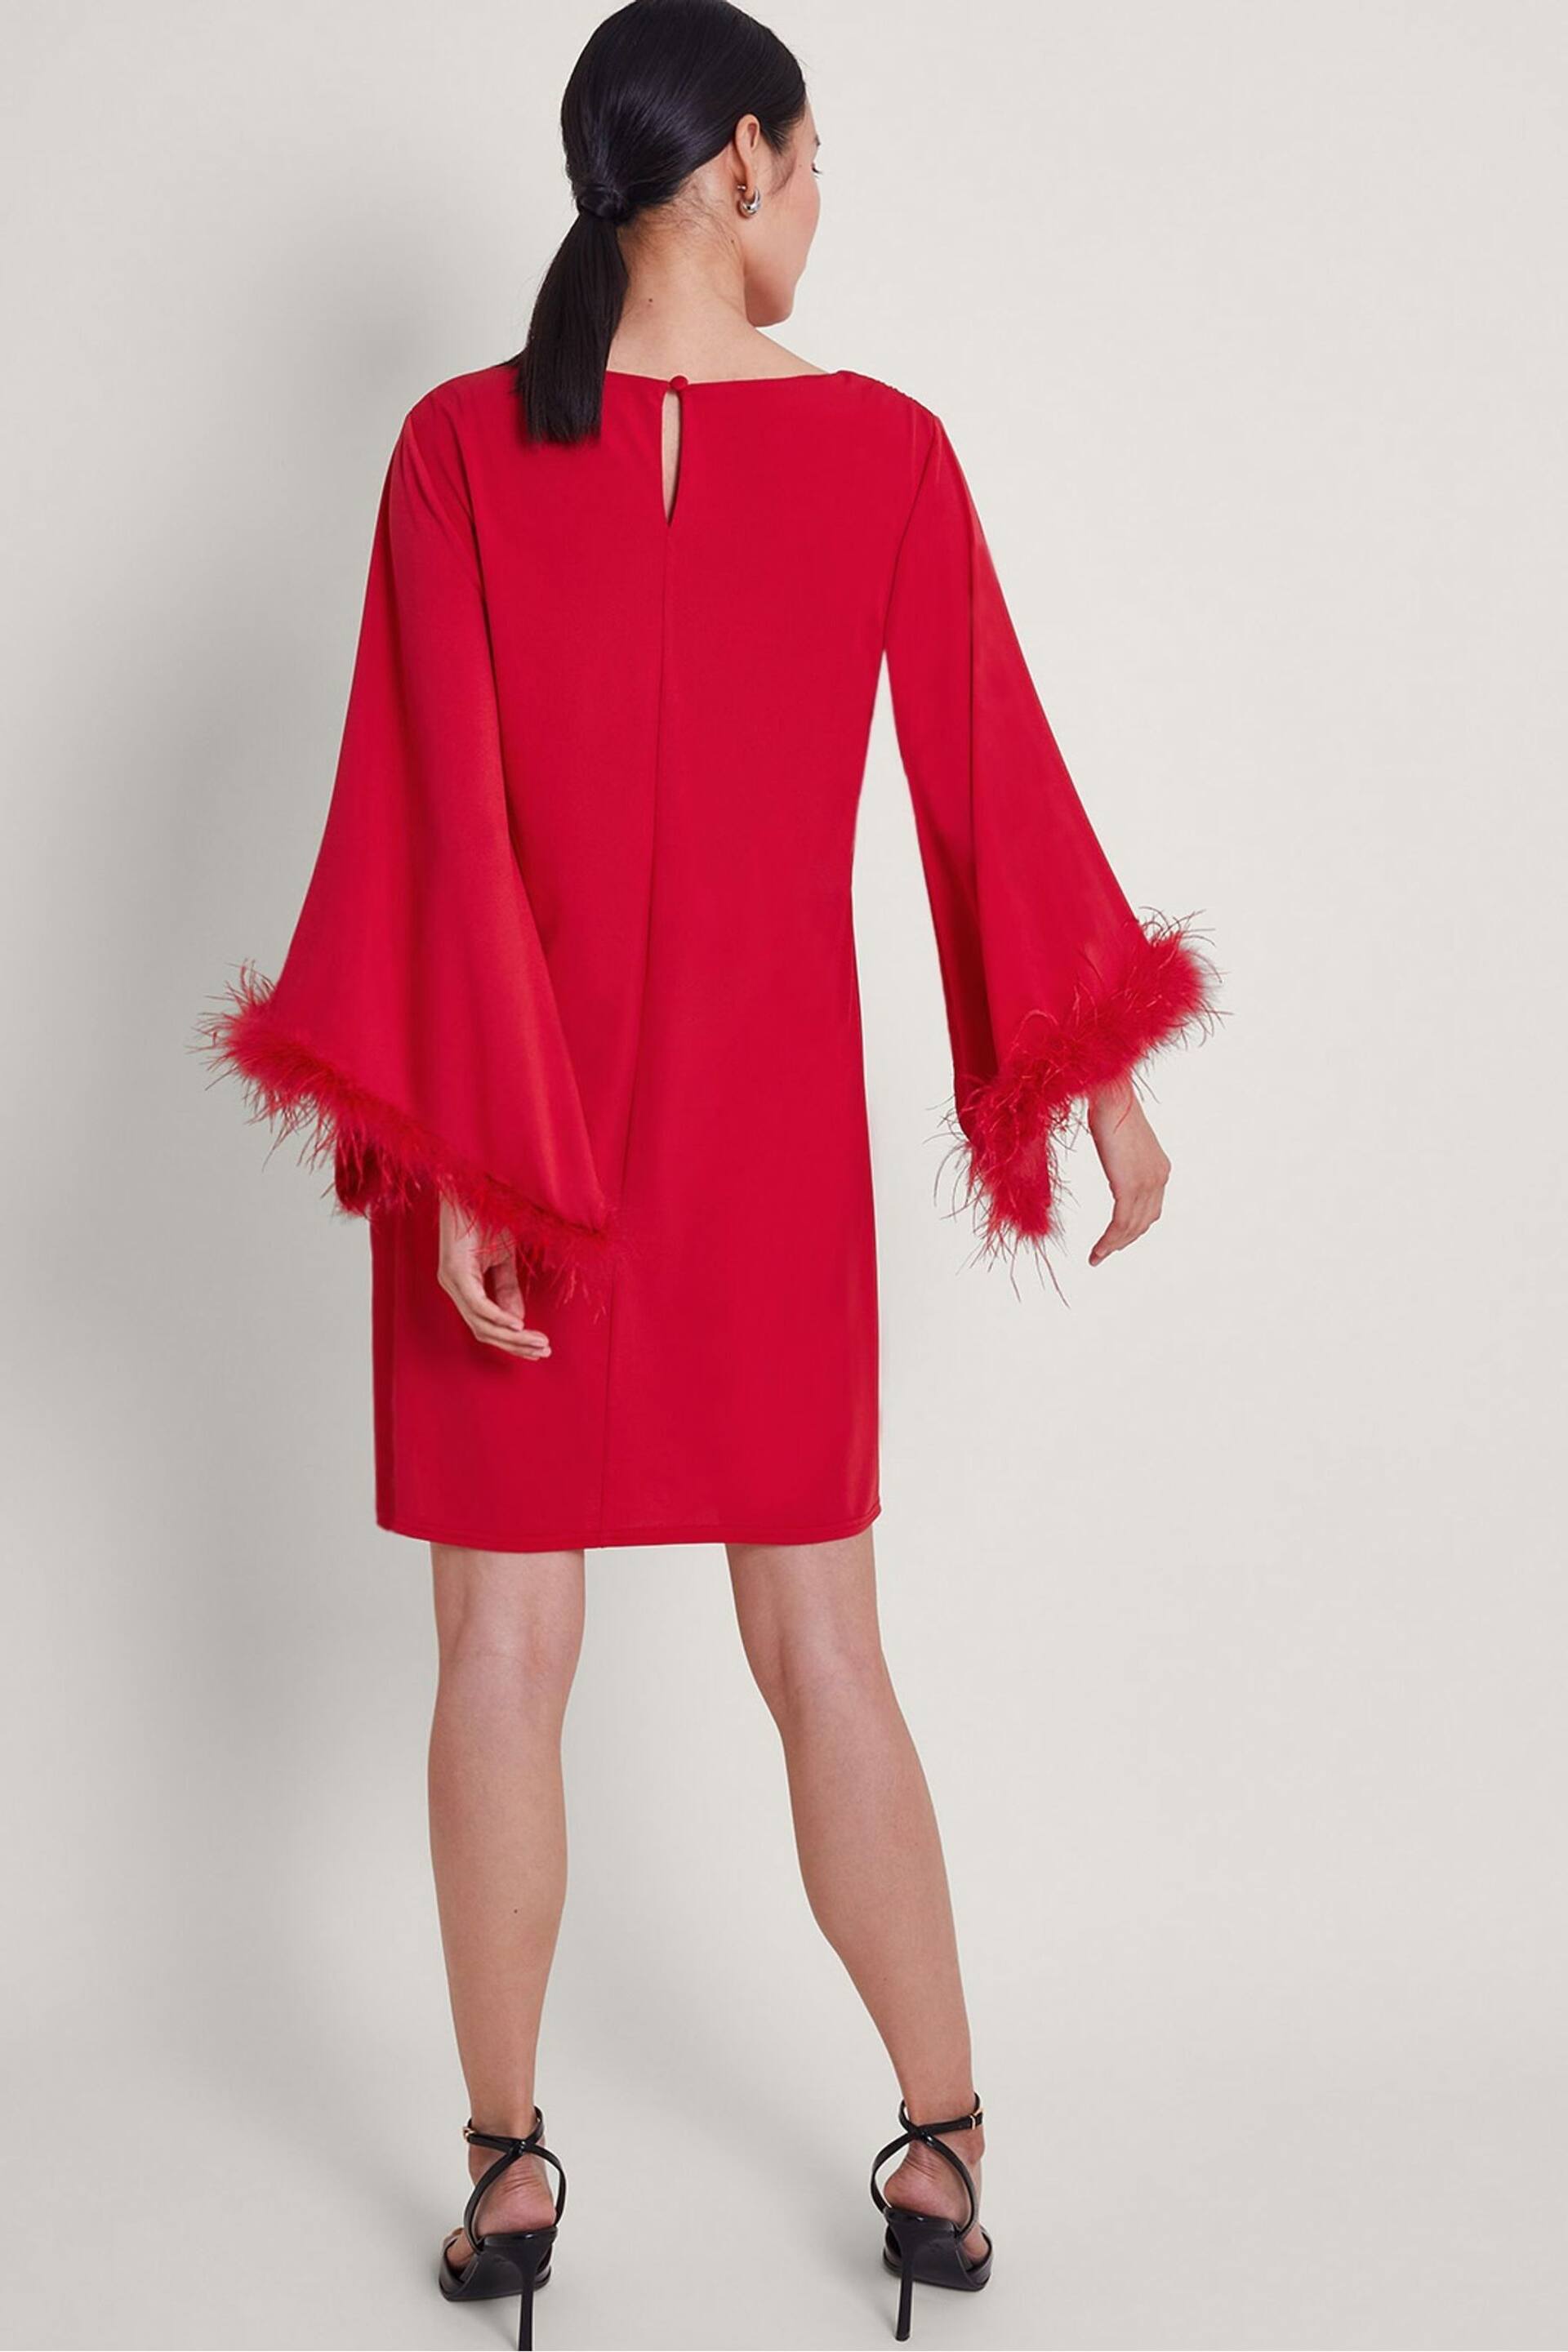 Monsoon Red Fi Feather Tunic Dress - Image 3 of 4